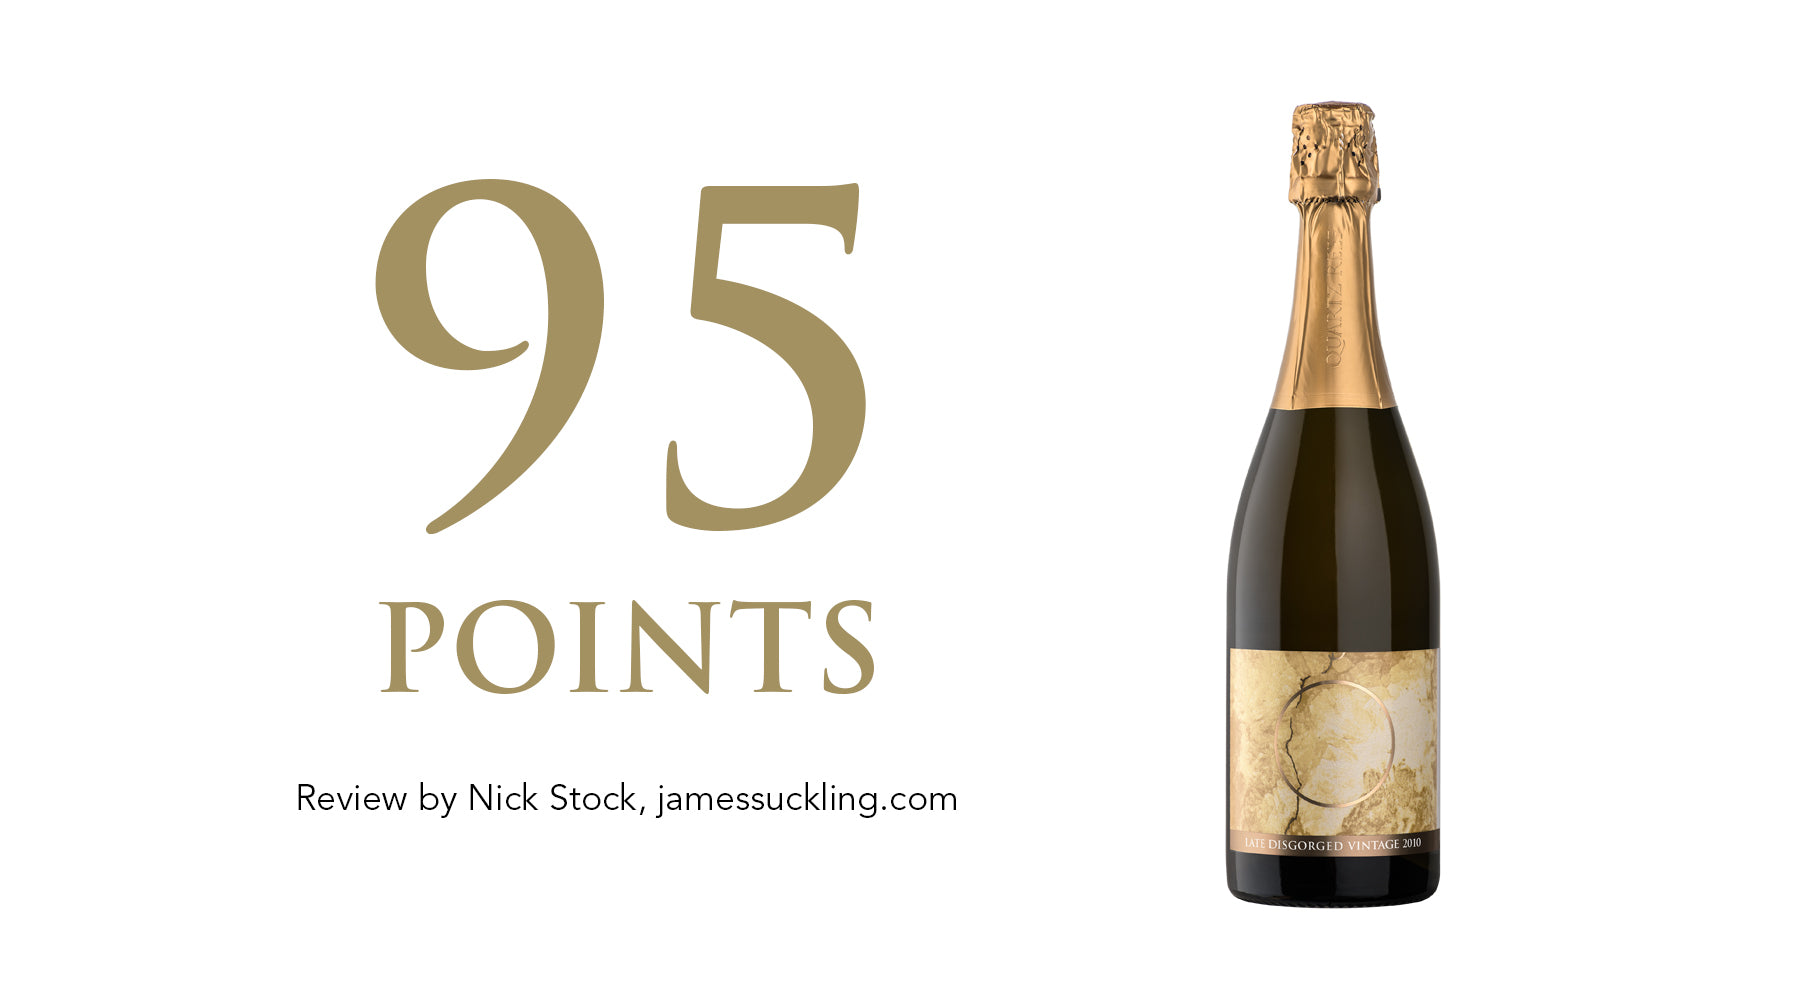 Late Disgorged Vintage 2010 - Awarded 95 Points